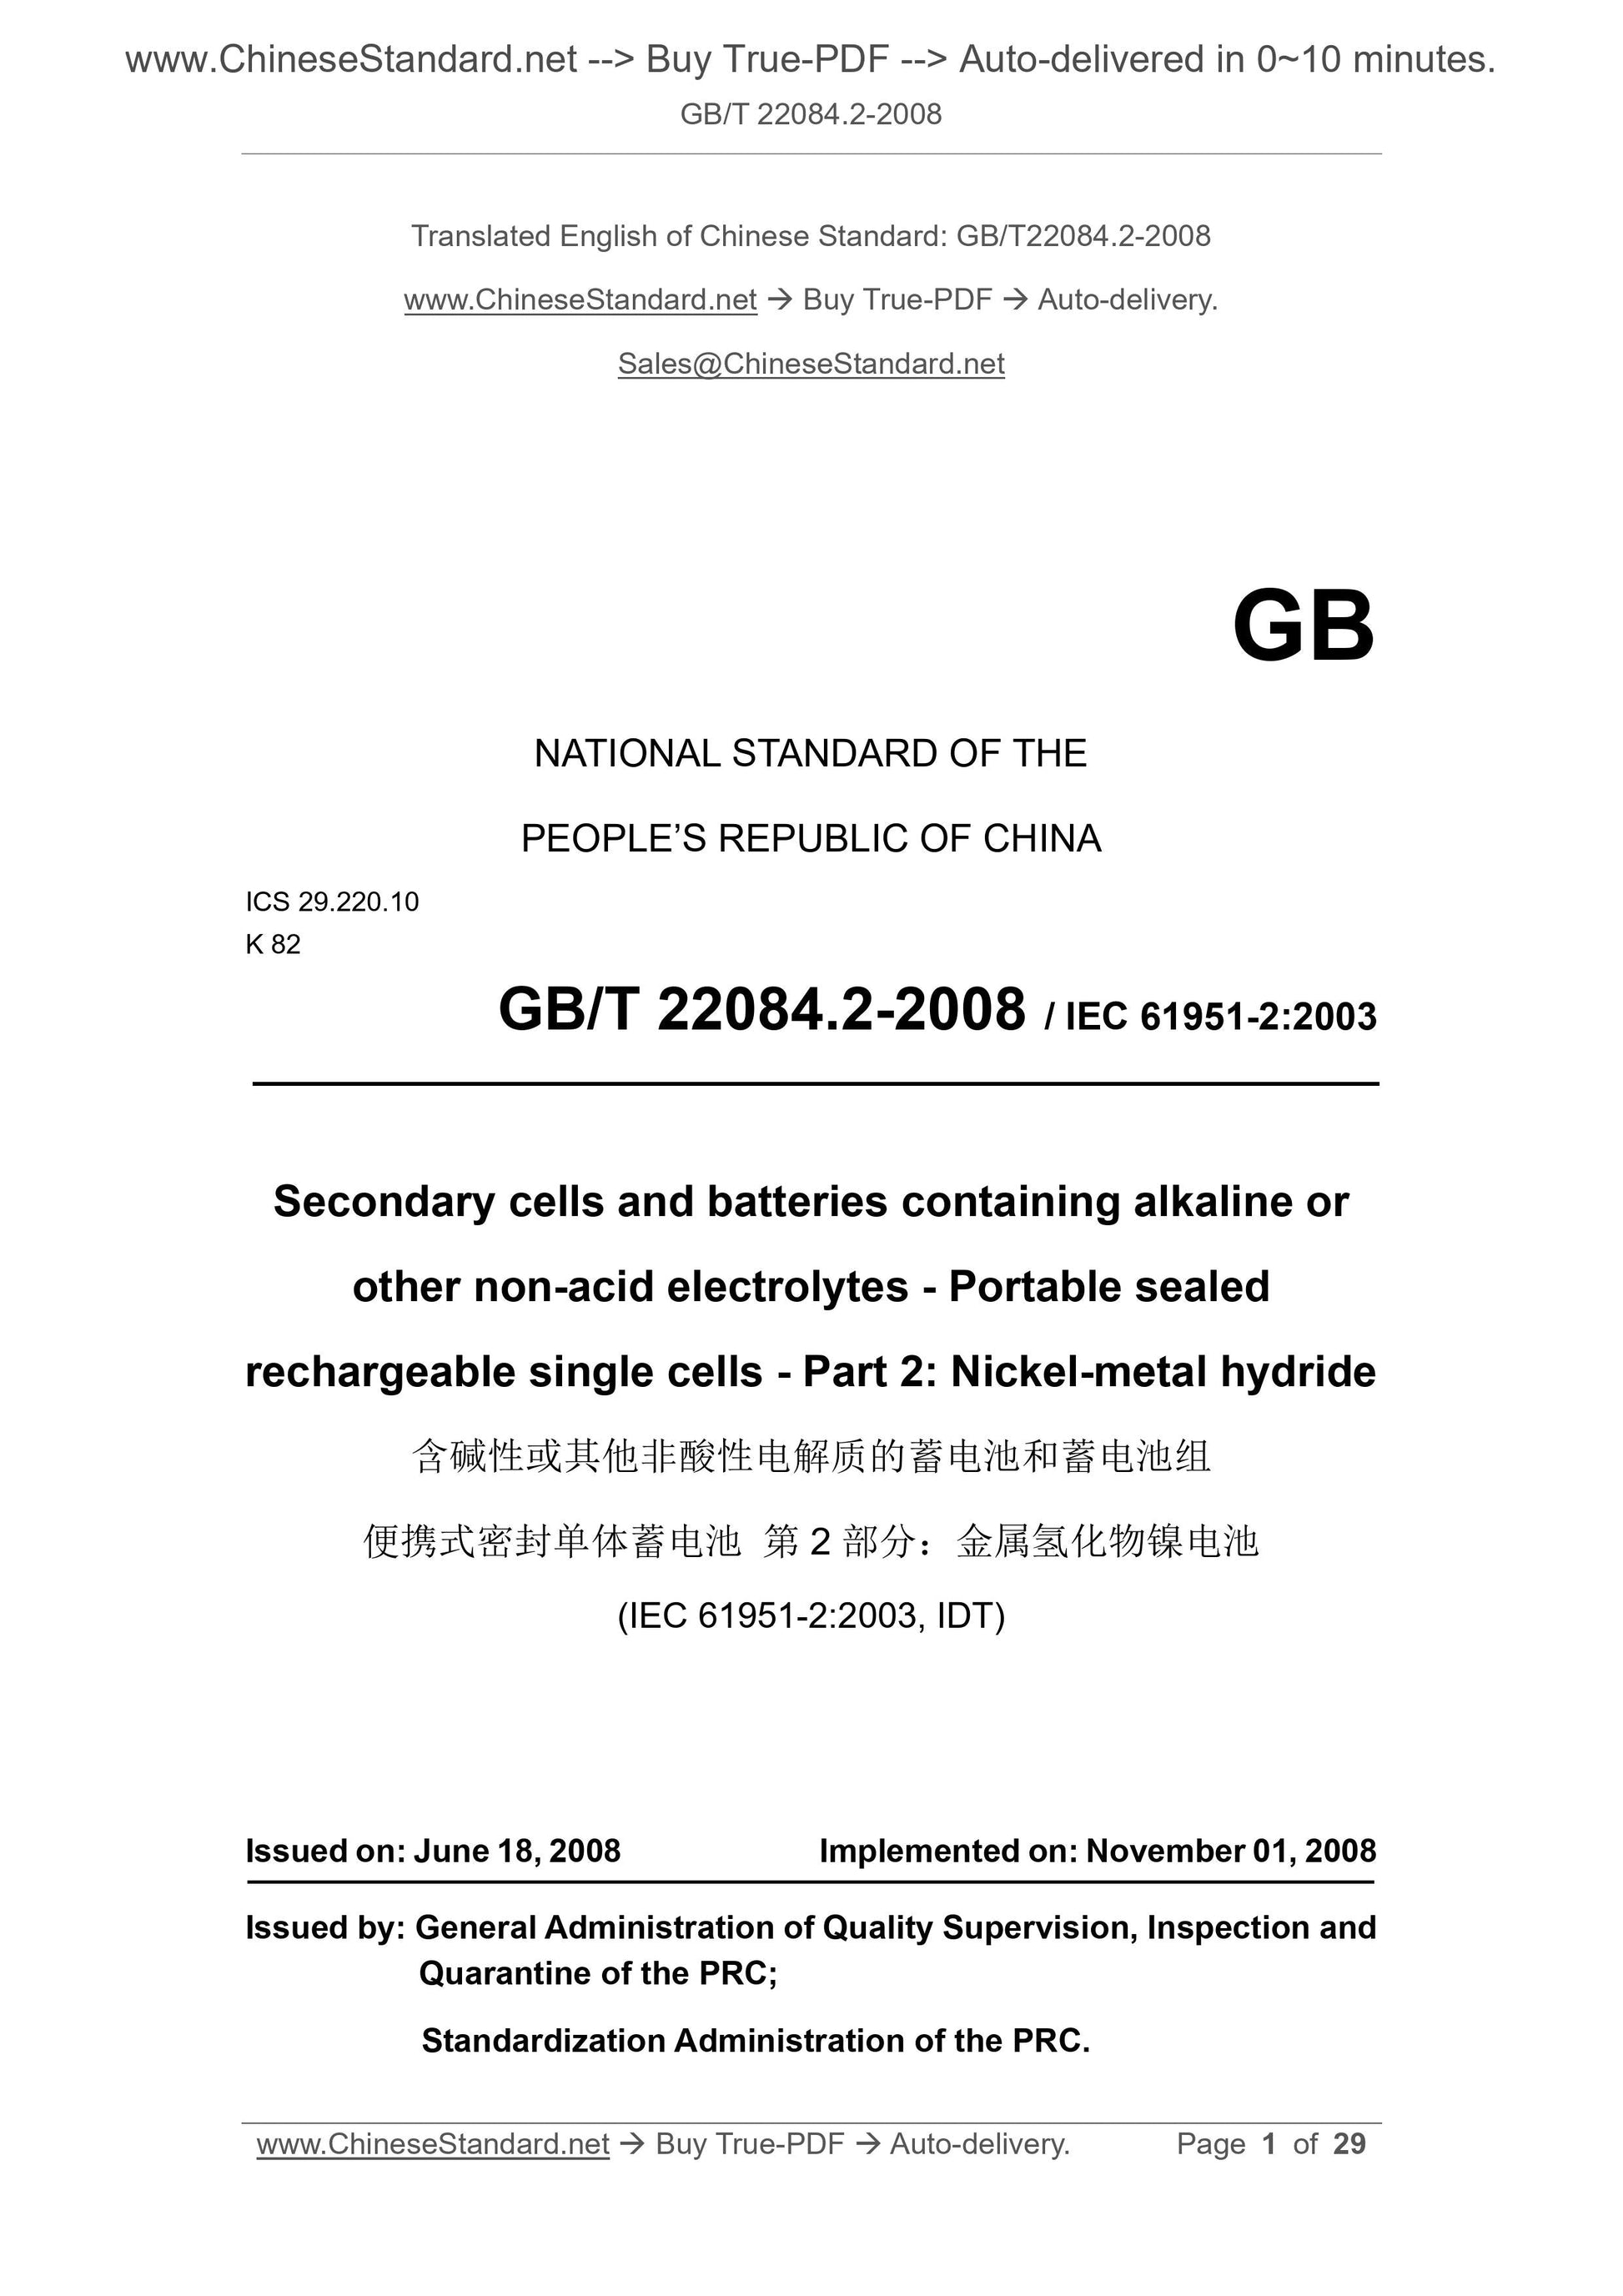 GB/T 22084.2-2008 Page 1